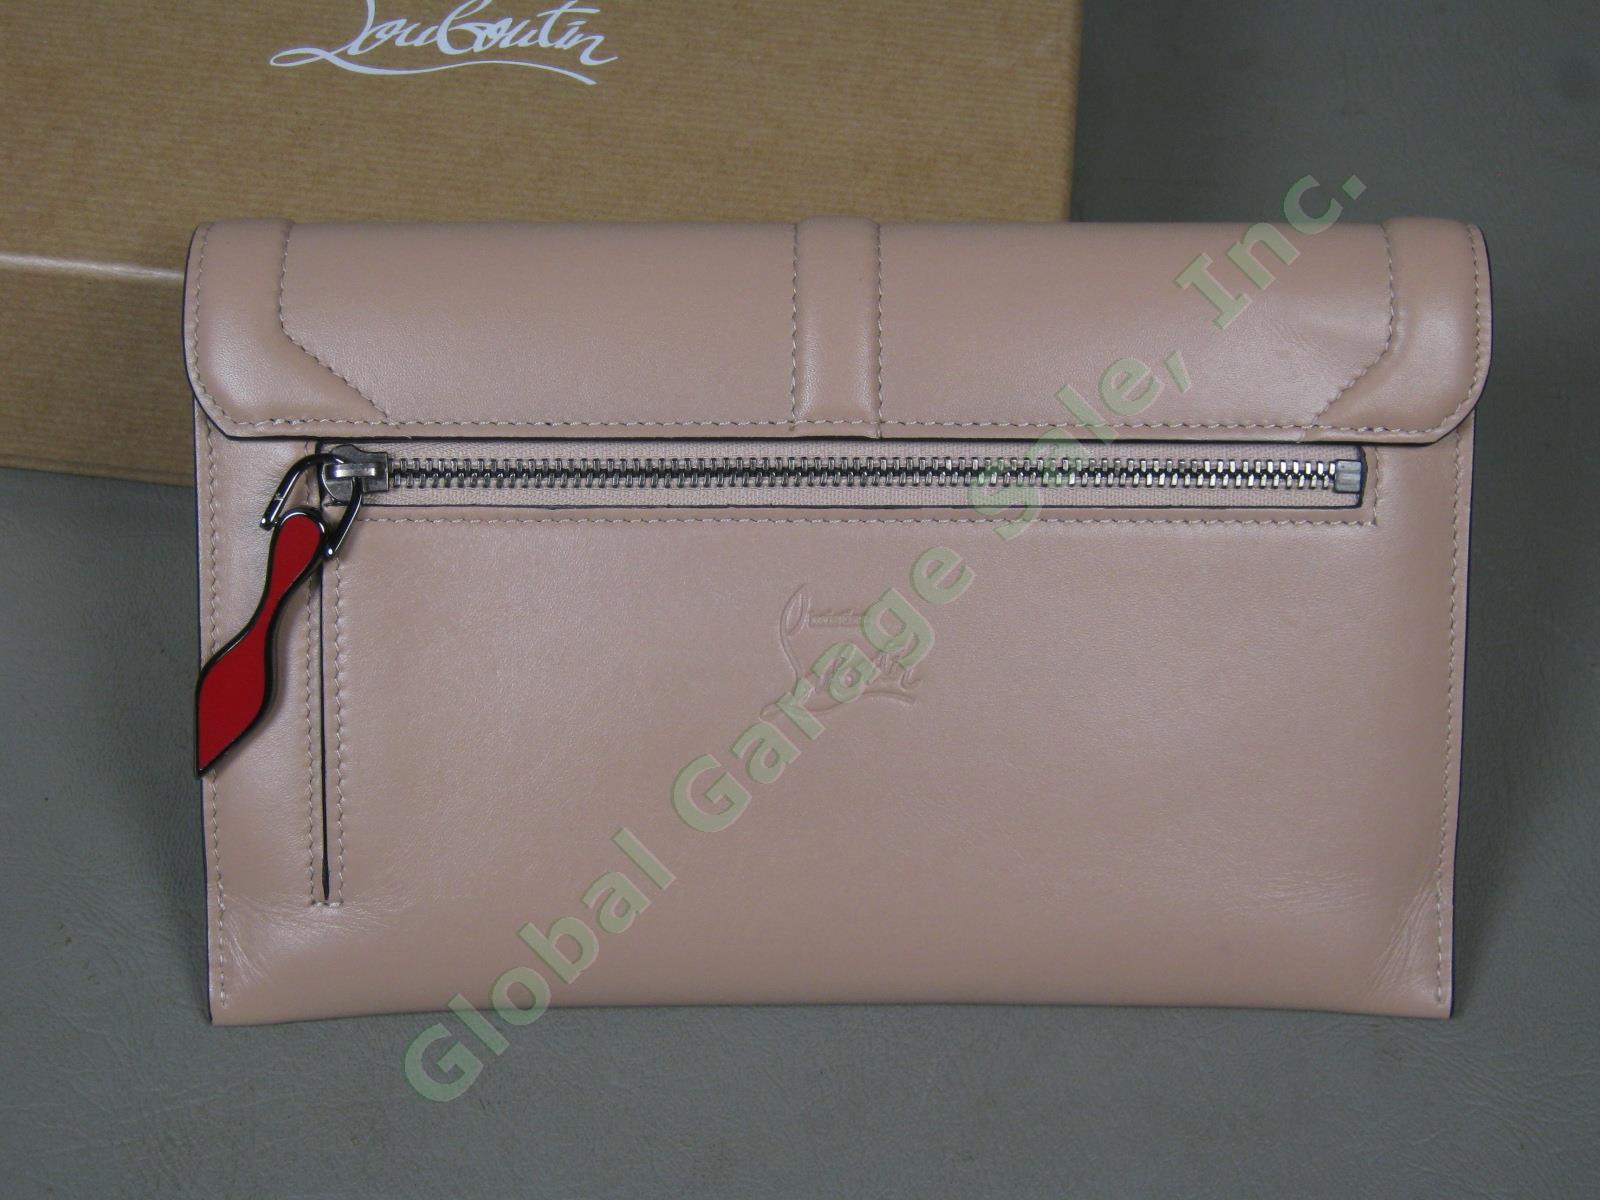 NEW! Christian Louboutin Nude Sweet Charity Sotto Pelle Pouchette Clutch Purse 3